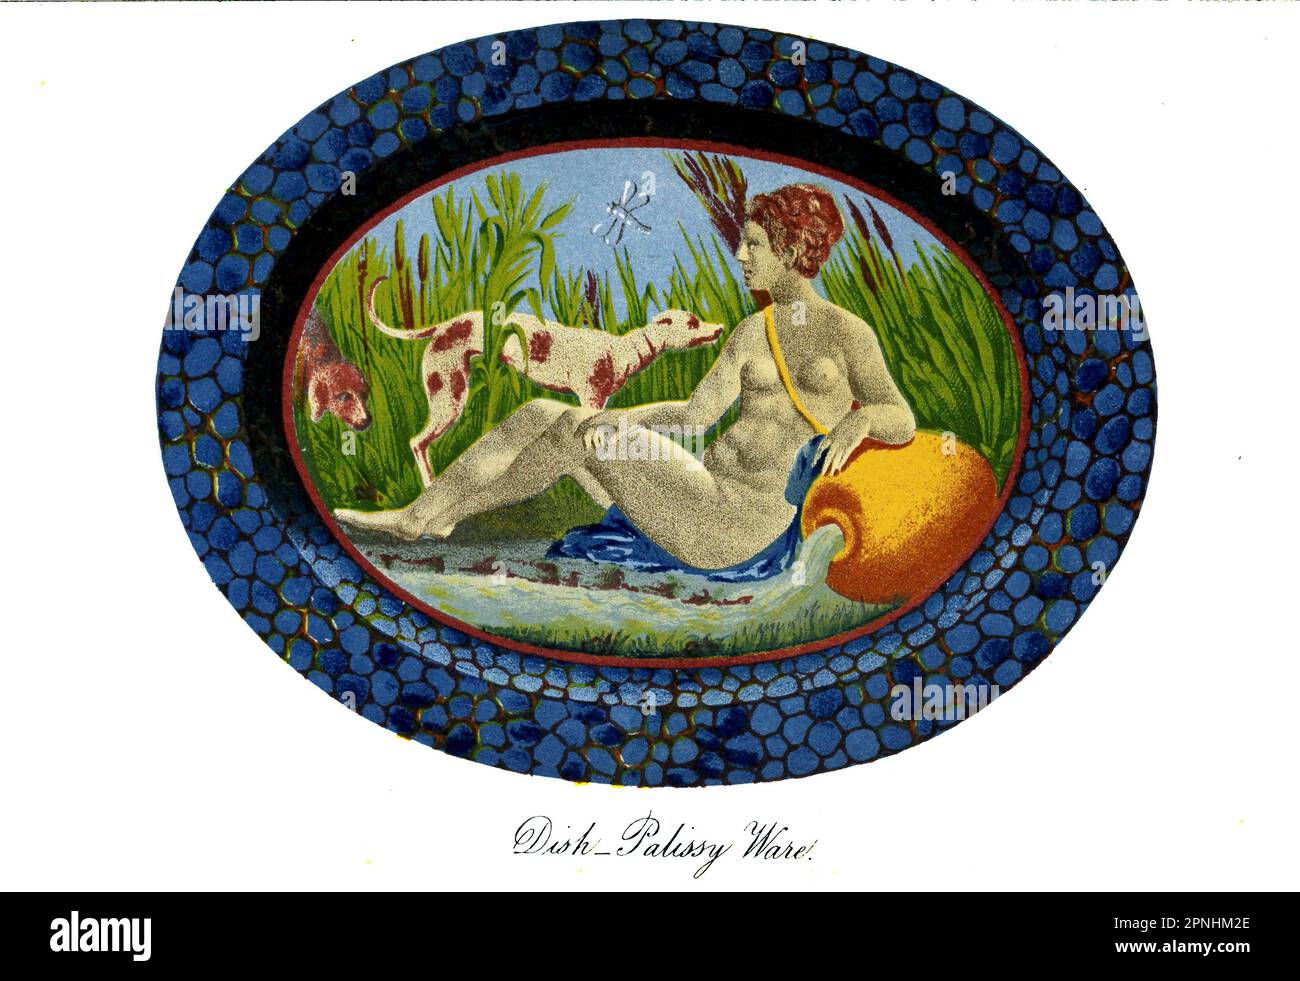 DISH BY BERNARD PALISSY Subject, a Nymph reclining among the reeds, her arm resting upon an urn, from which escapes a stream. Near her stands the dog Bliandi, discovering a spring (Fons). The subject is a personification of Fontainebleau (anciently called Fons Bliandi, or Blandi*), a name it is said to have derived from one of the hounds of Louis VII., who discovered a spring there. This dish is after a design of Maitre Roux, who was employed by Francis I. in the works of the Palace of Fontainebleau. Diameter, 11.5 inches. from the book Collections towards a history of pottery and porcelain, i Stock Photo